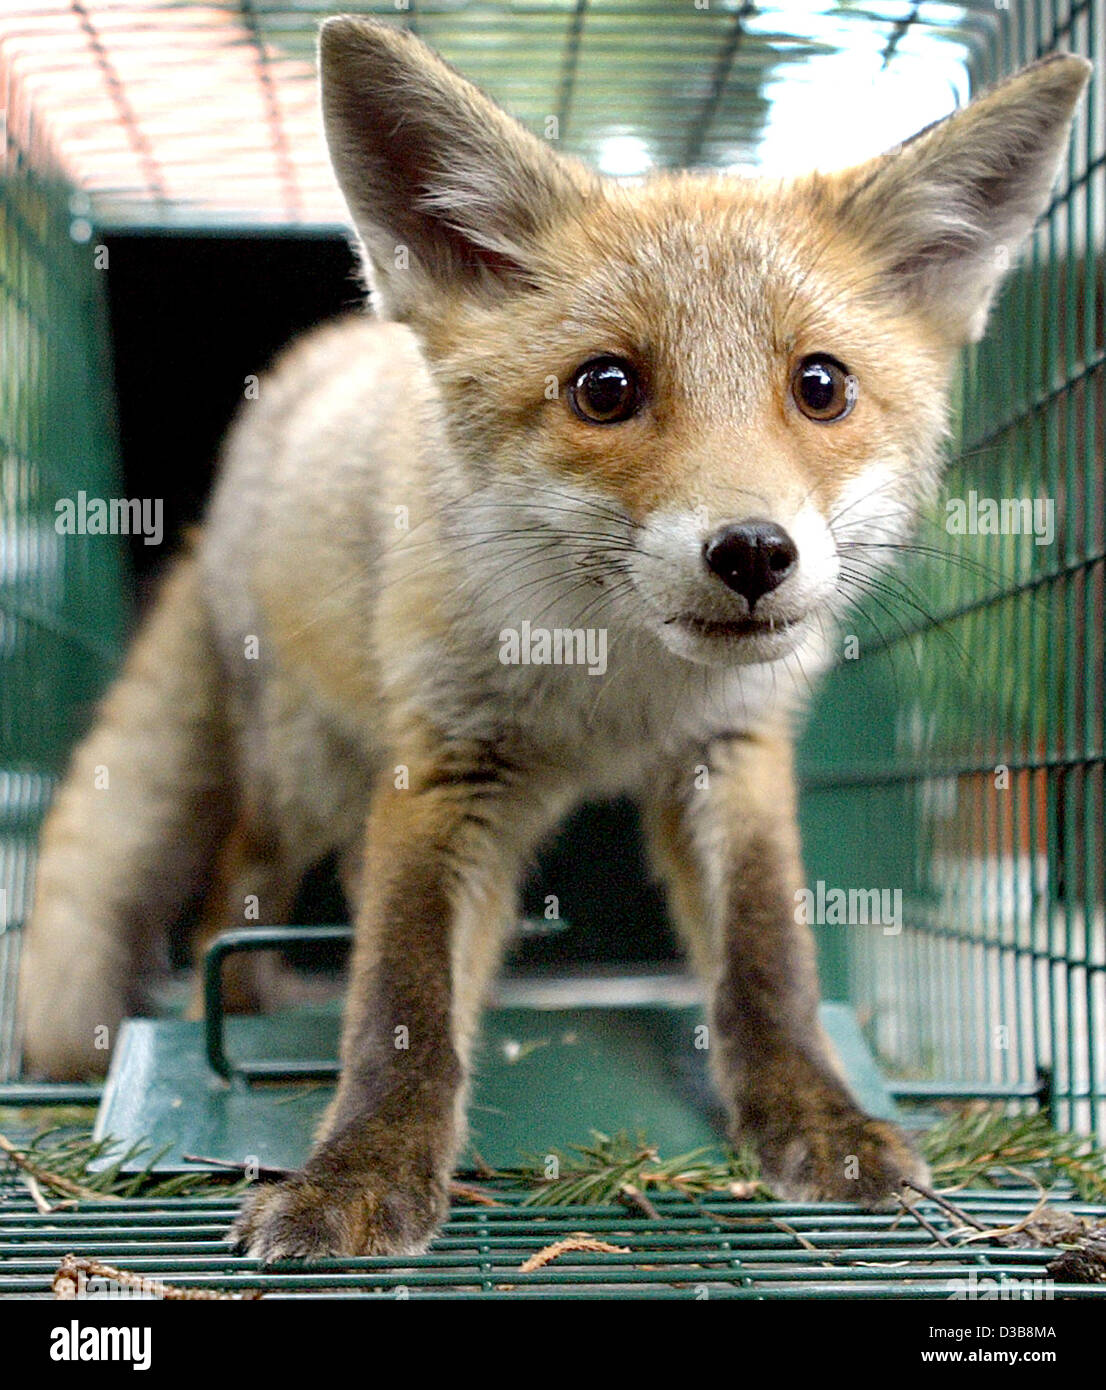 Human Interest Hum Animals Fox Cage Germany High Resolution Stock  Photography and Images - Alamy